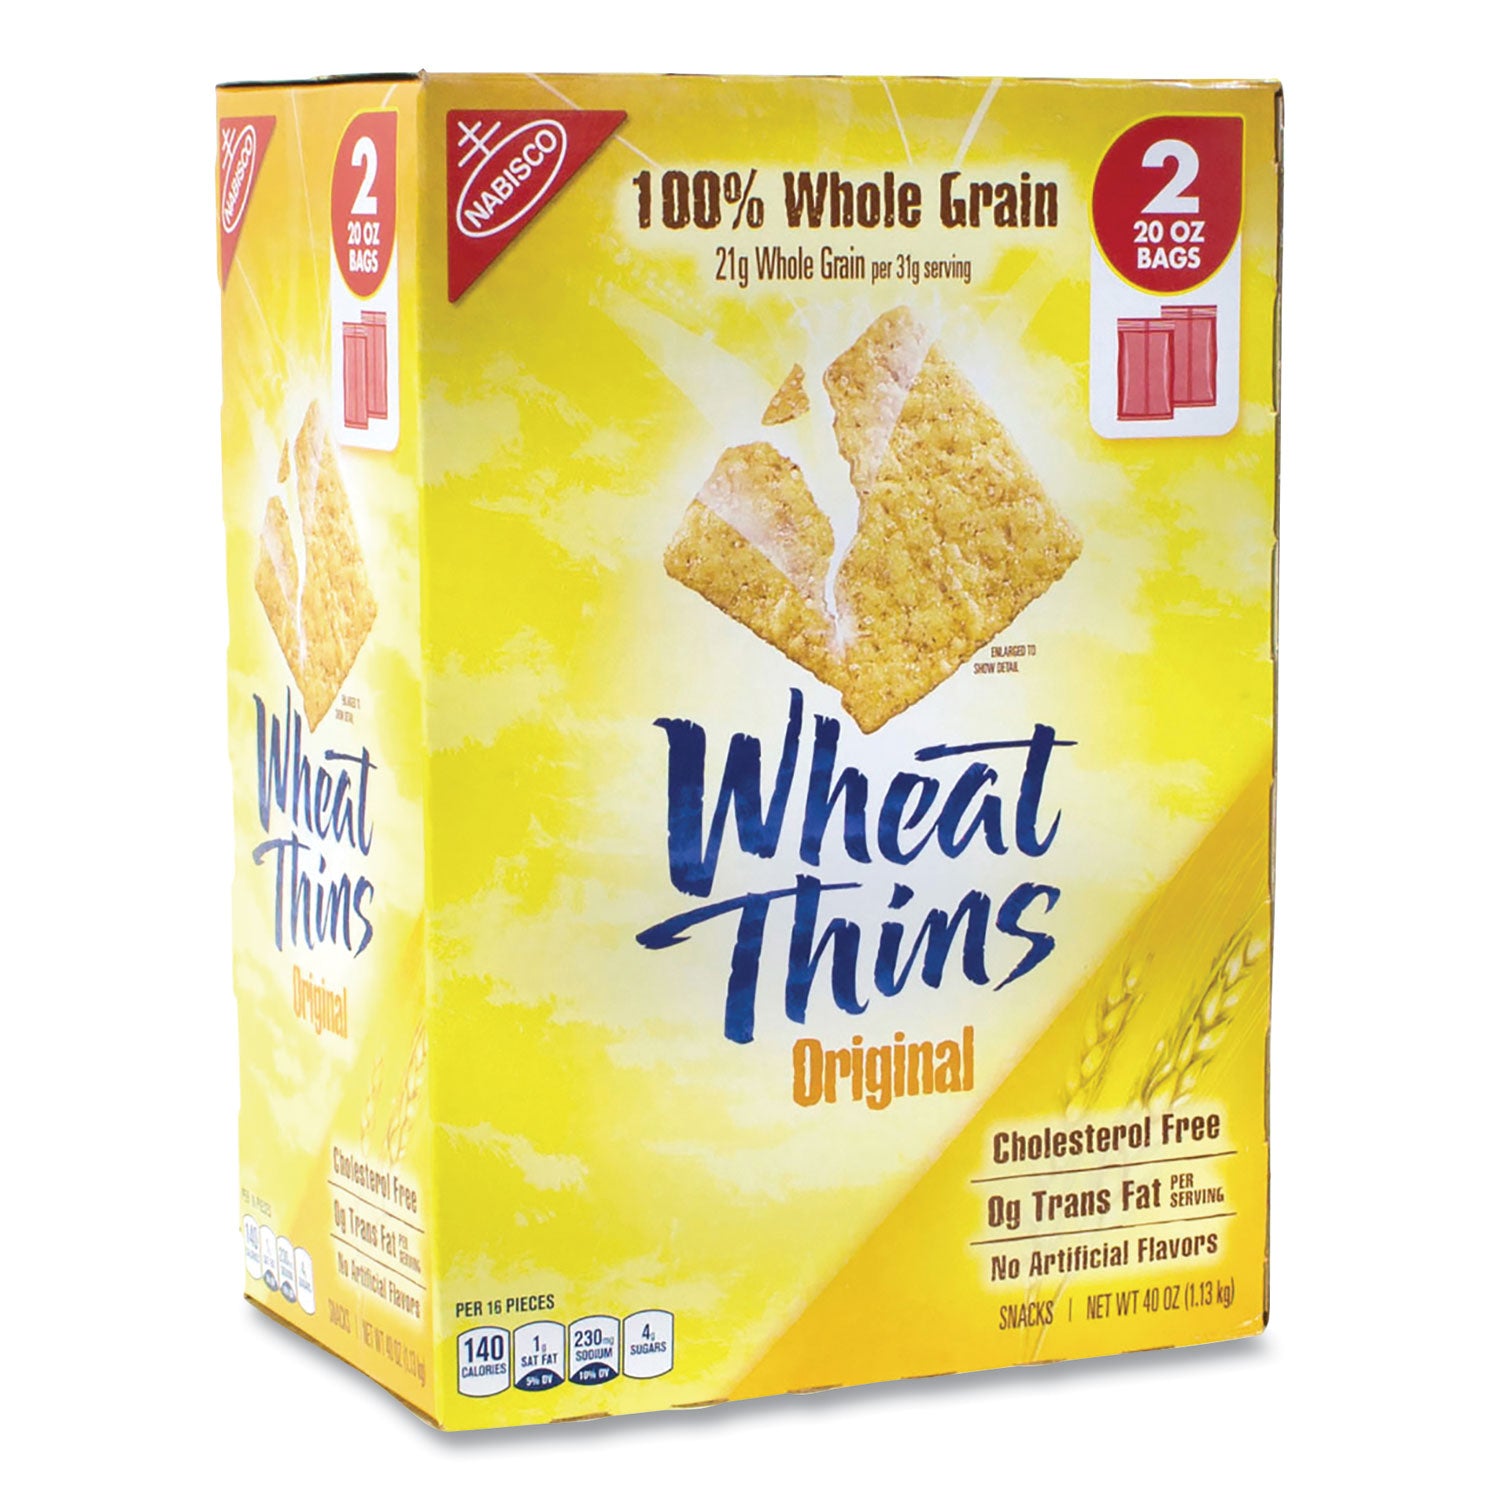 wheat-thins-crackers-original-20-oz-bag-2-bags-pack-ships-in-1-3-business-days_grr22000087 - 1